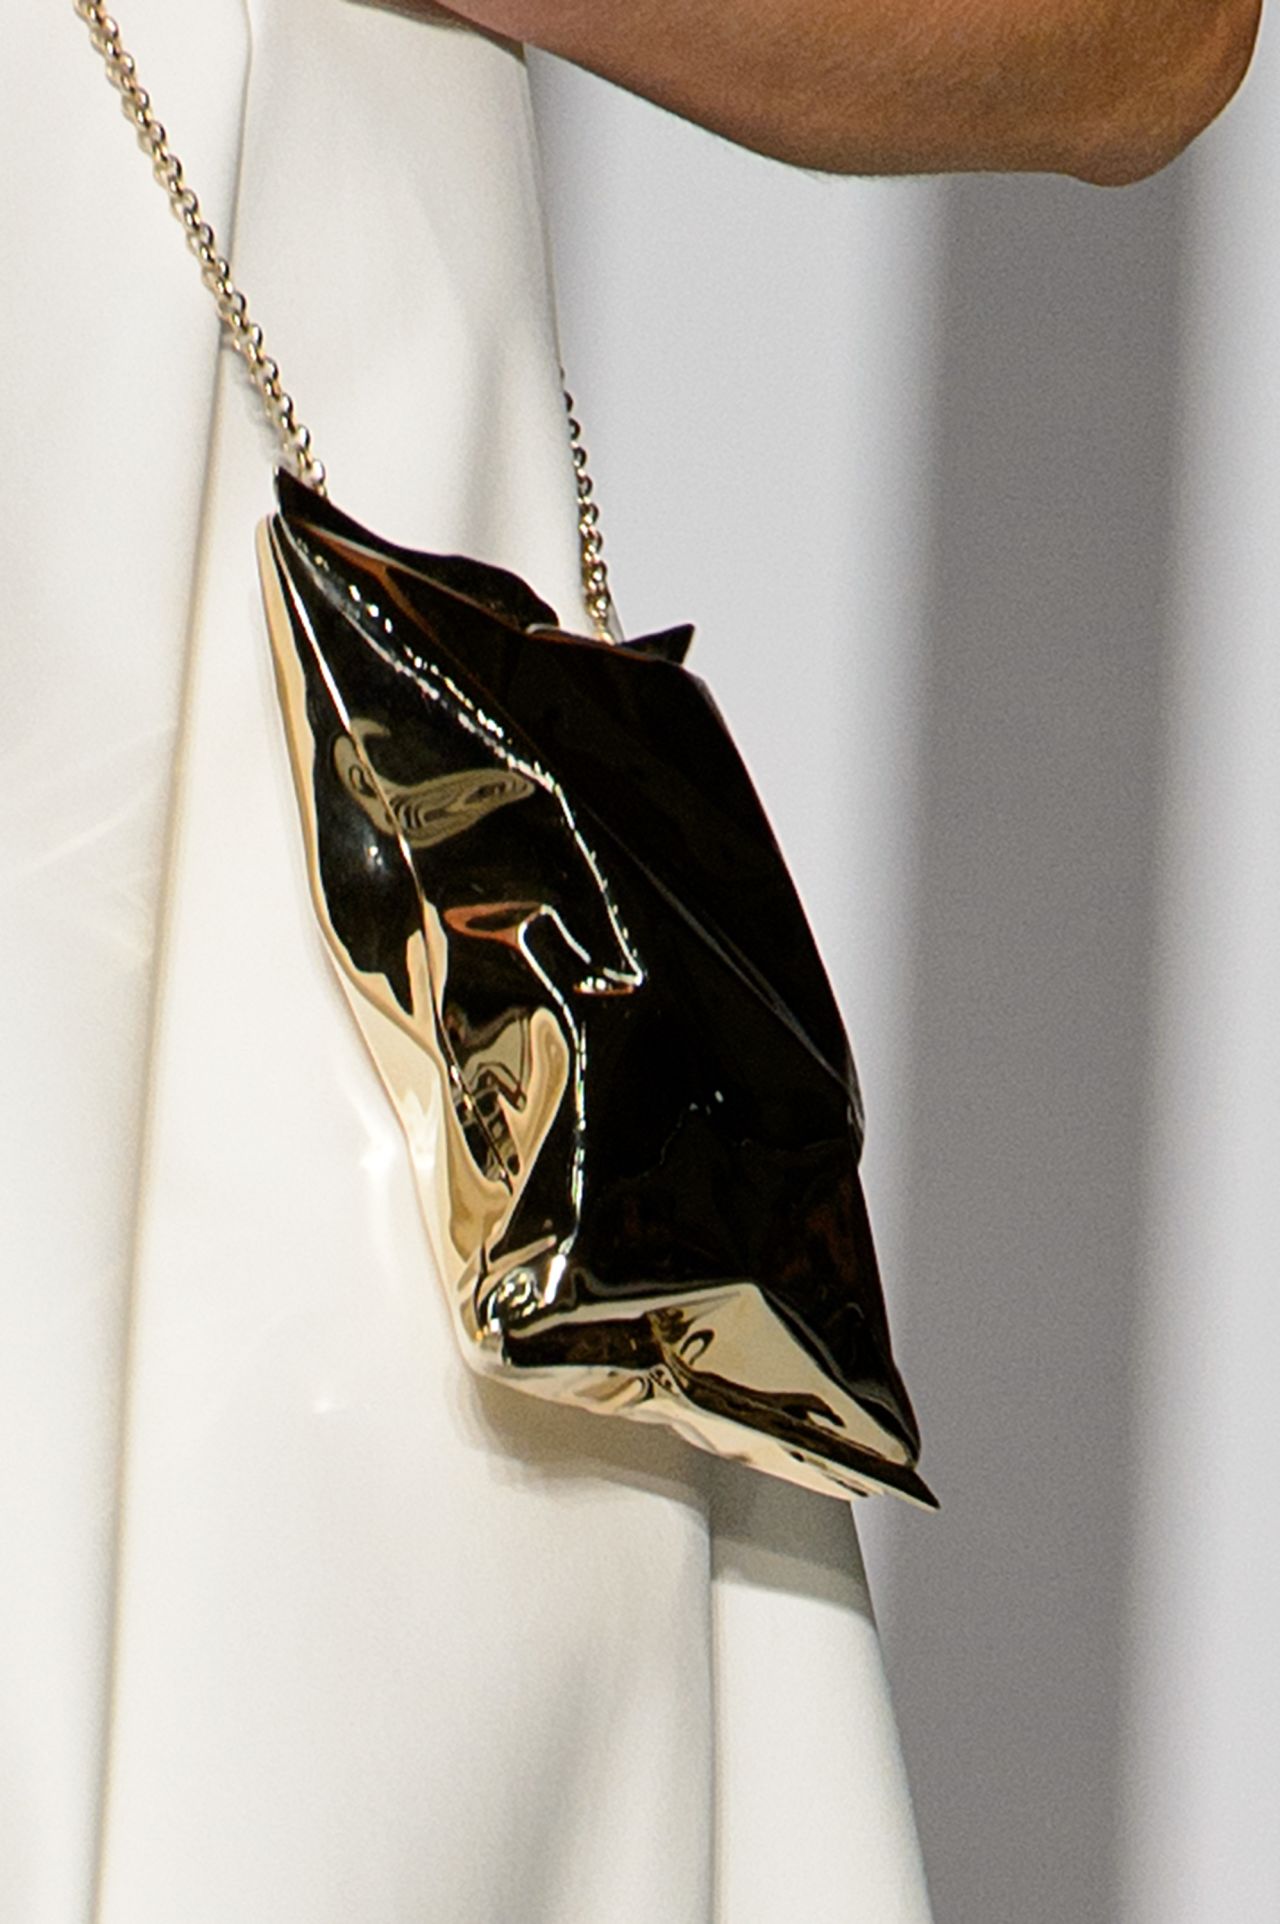 Anya Hindmarch has long sold bags shaped like a bag of chips. 